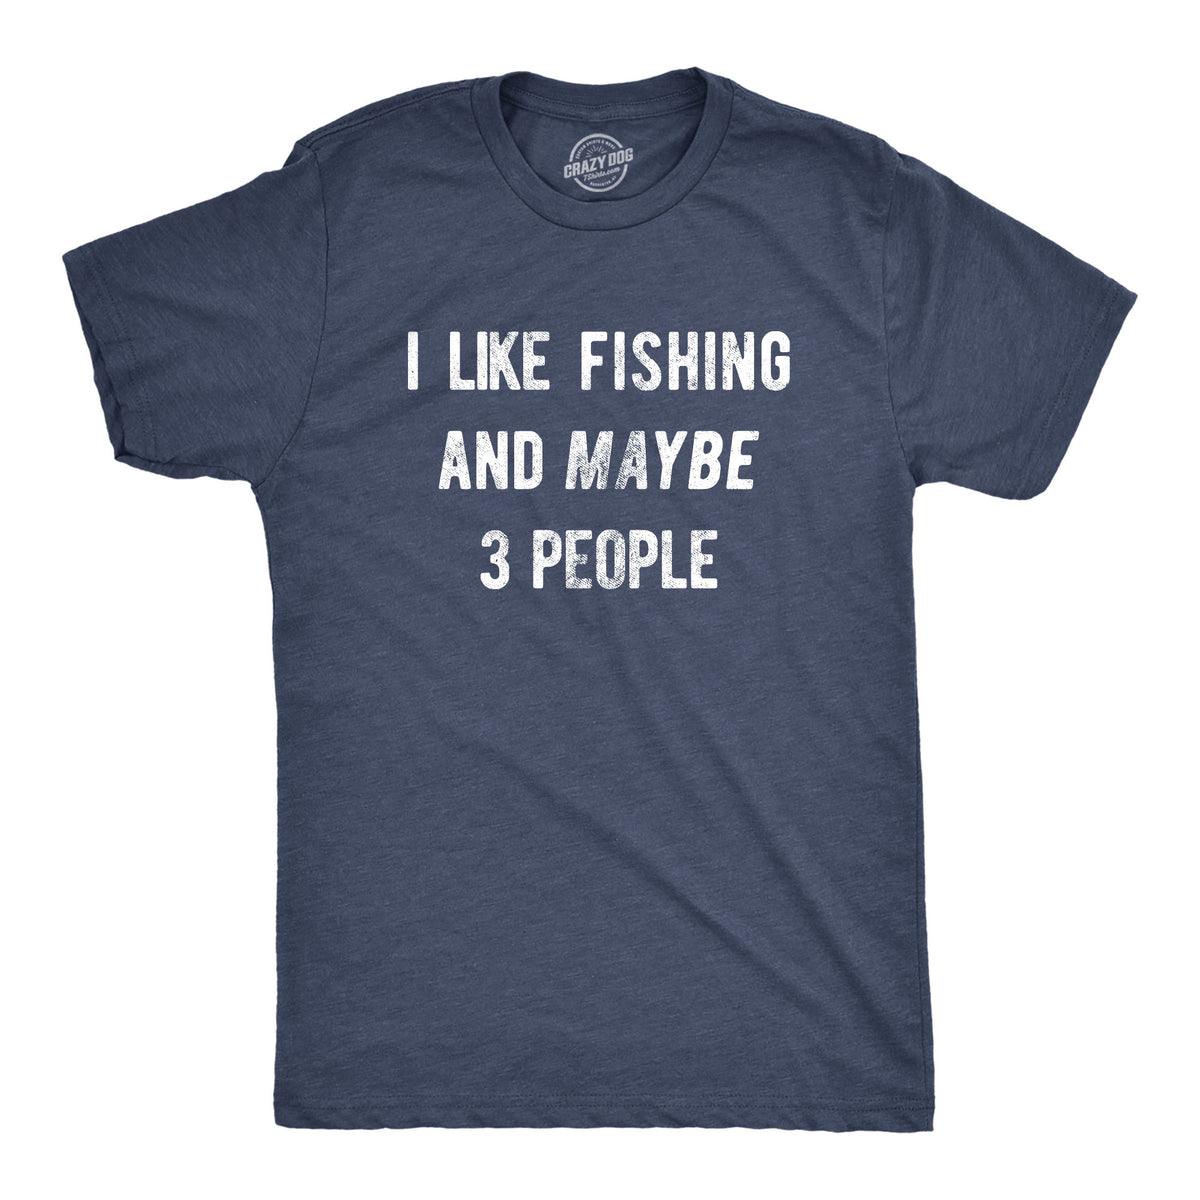 Mens I Like Fishing and Maybe 3 People Tshirt Funny Outdoorsman Father - 3XL